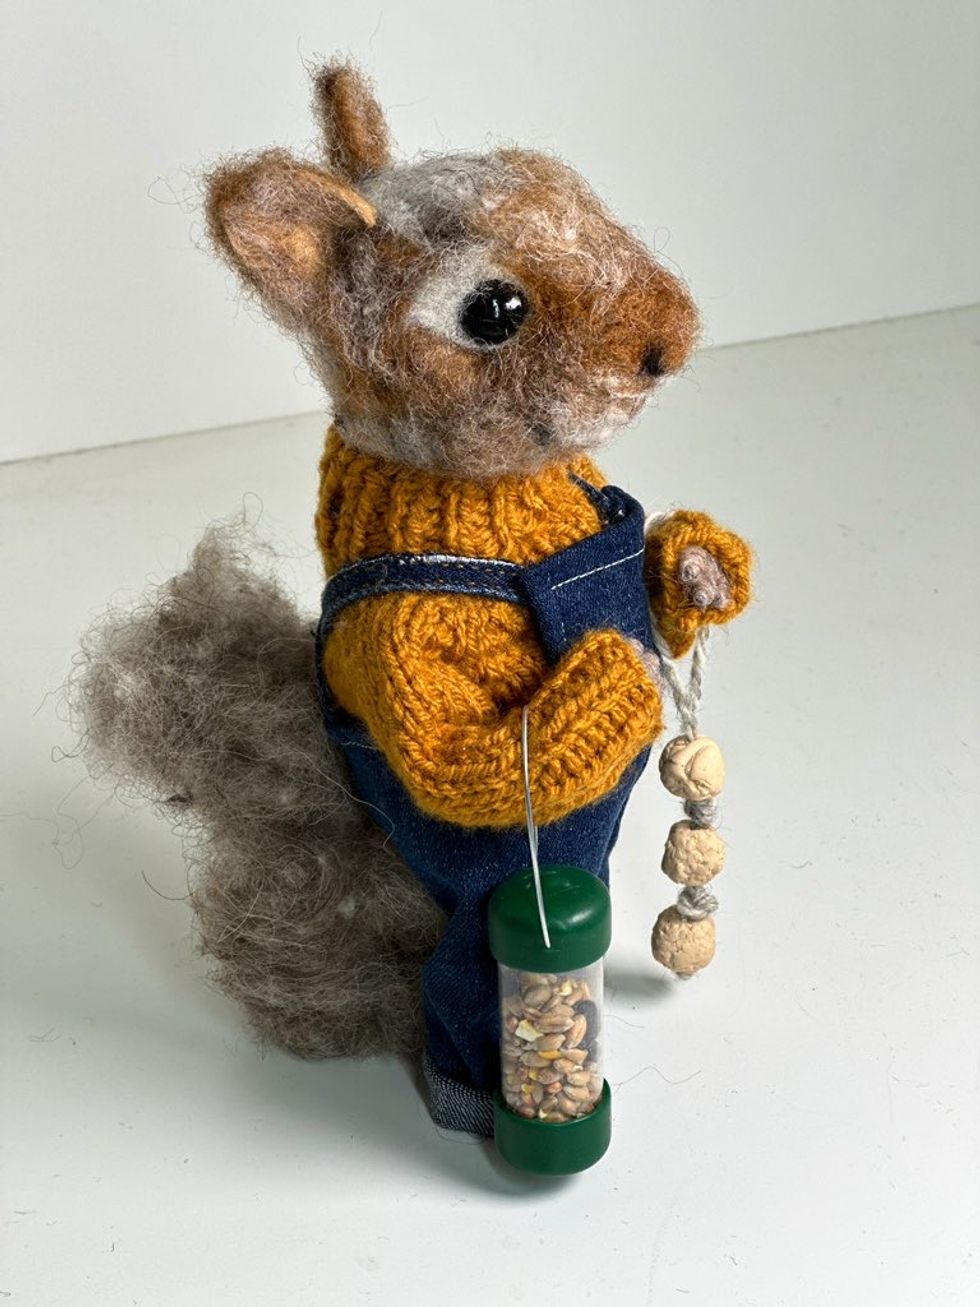 A sculpture of a mouse wearing dungarees and a sweater